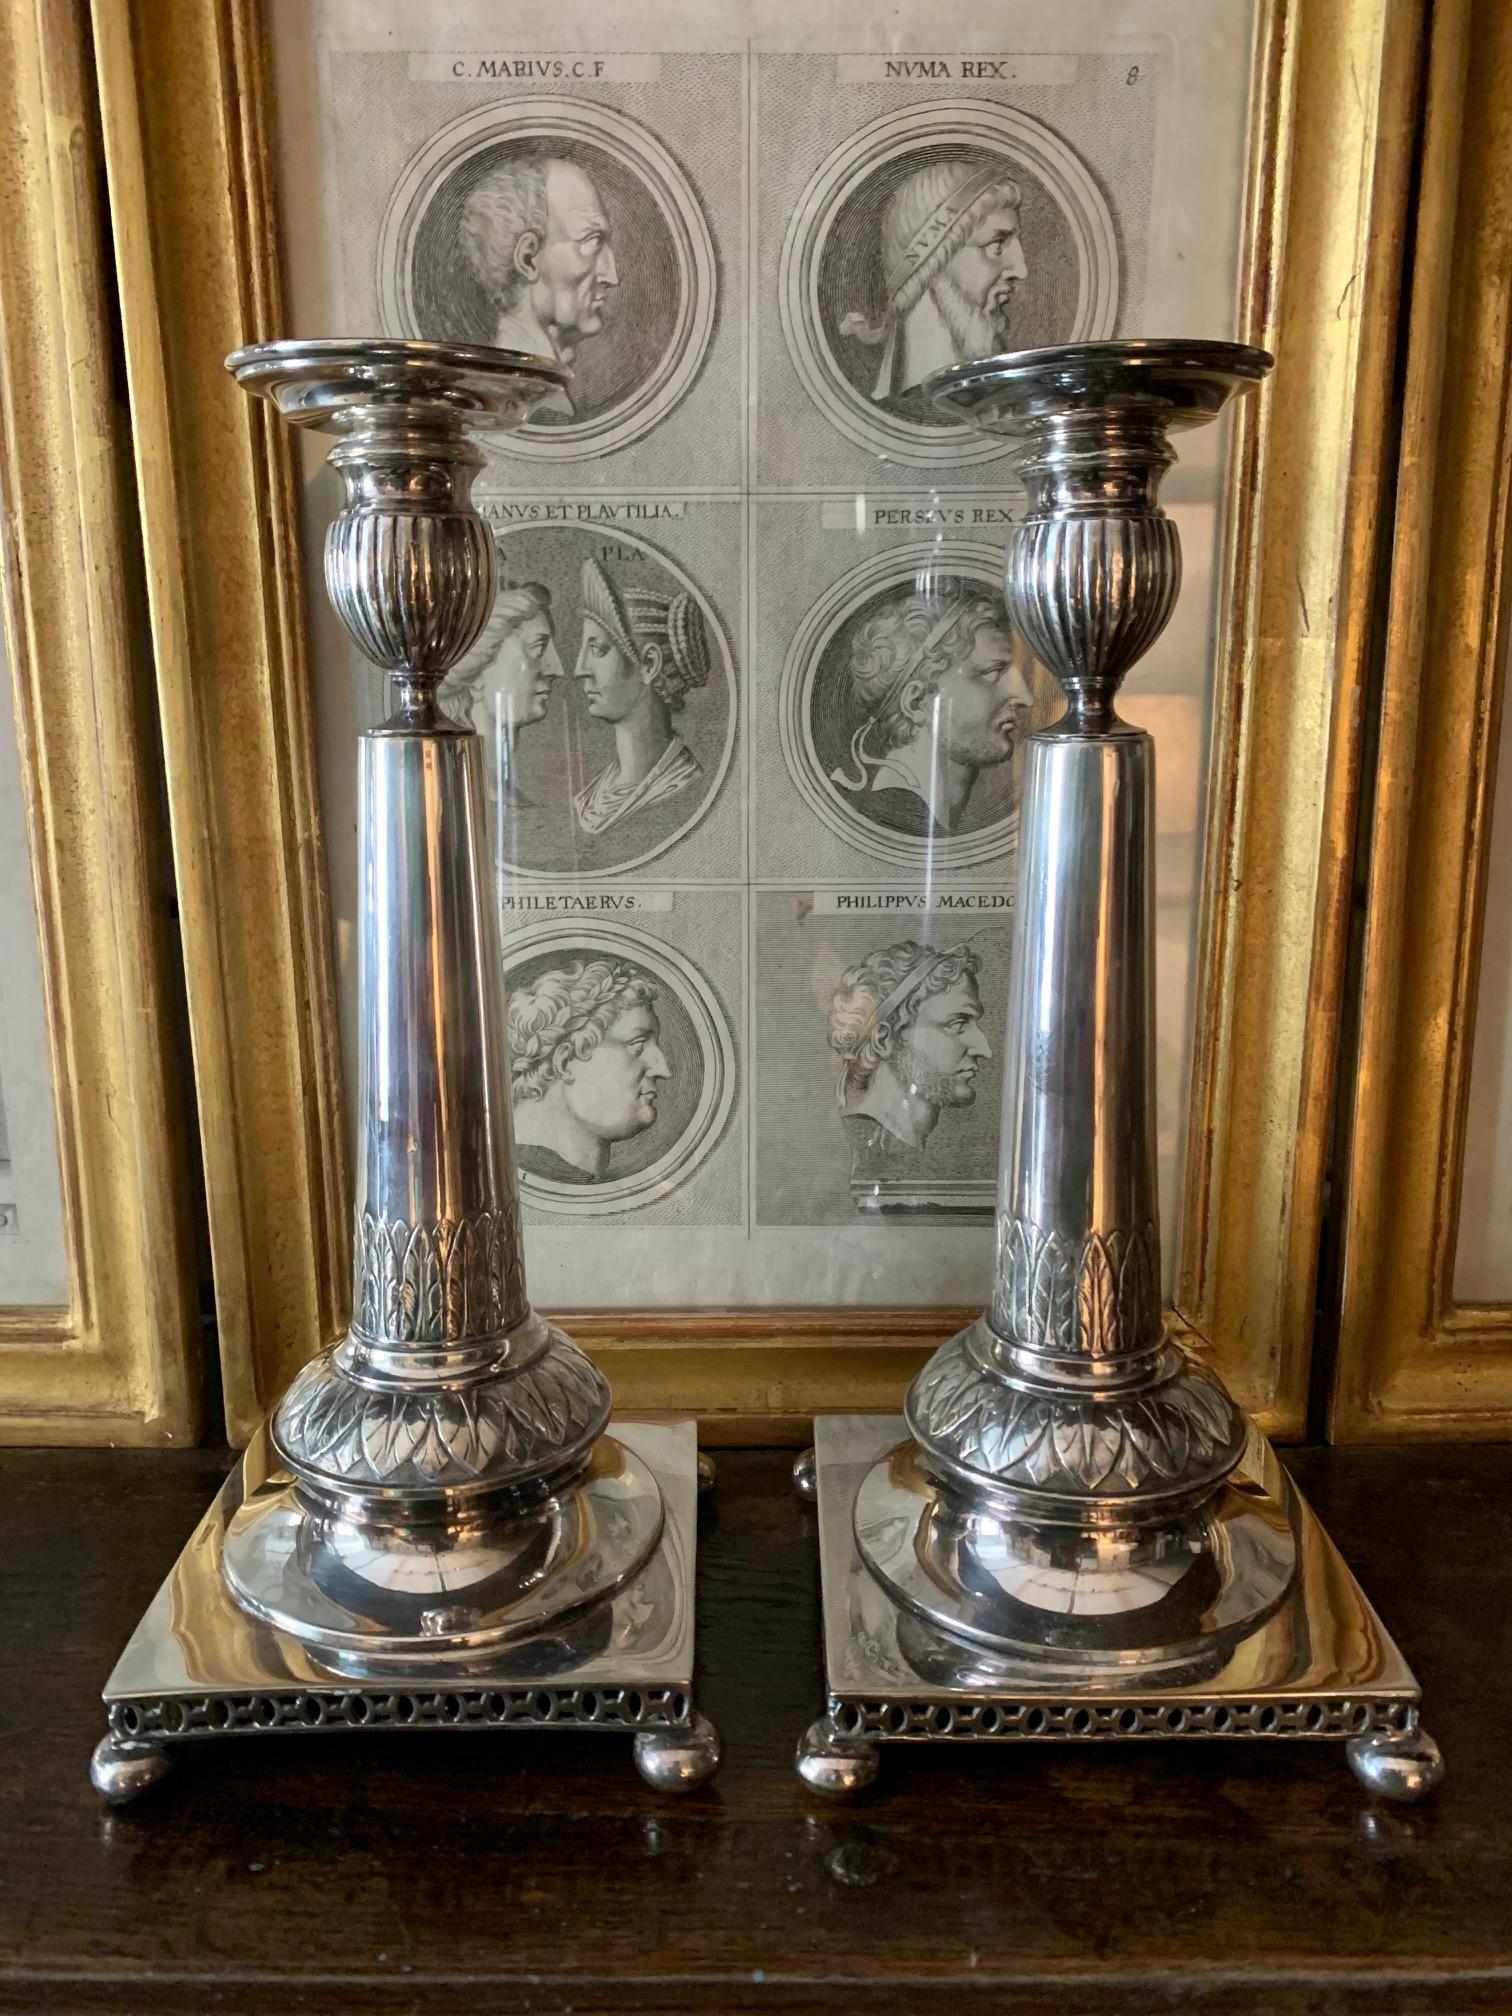 2oth Century Pair of Candlesticks in Silver Metal For Sale 4